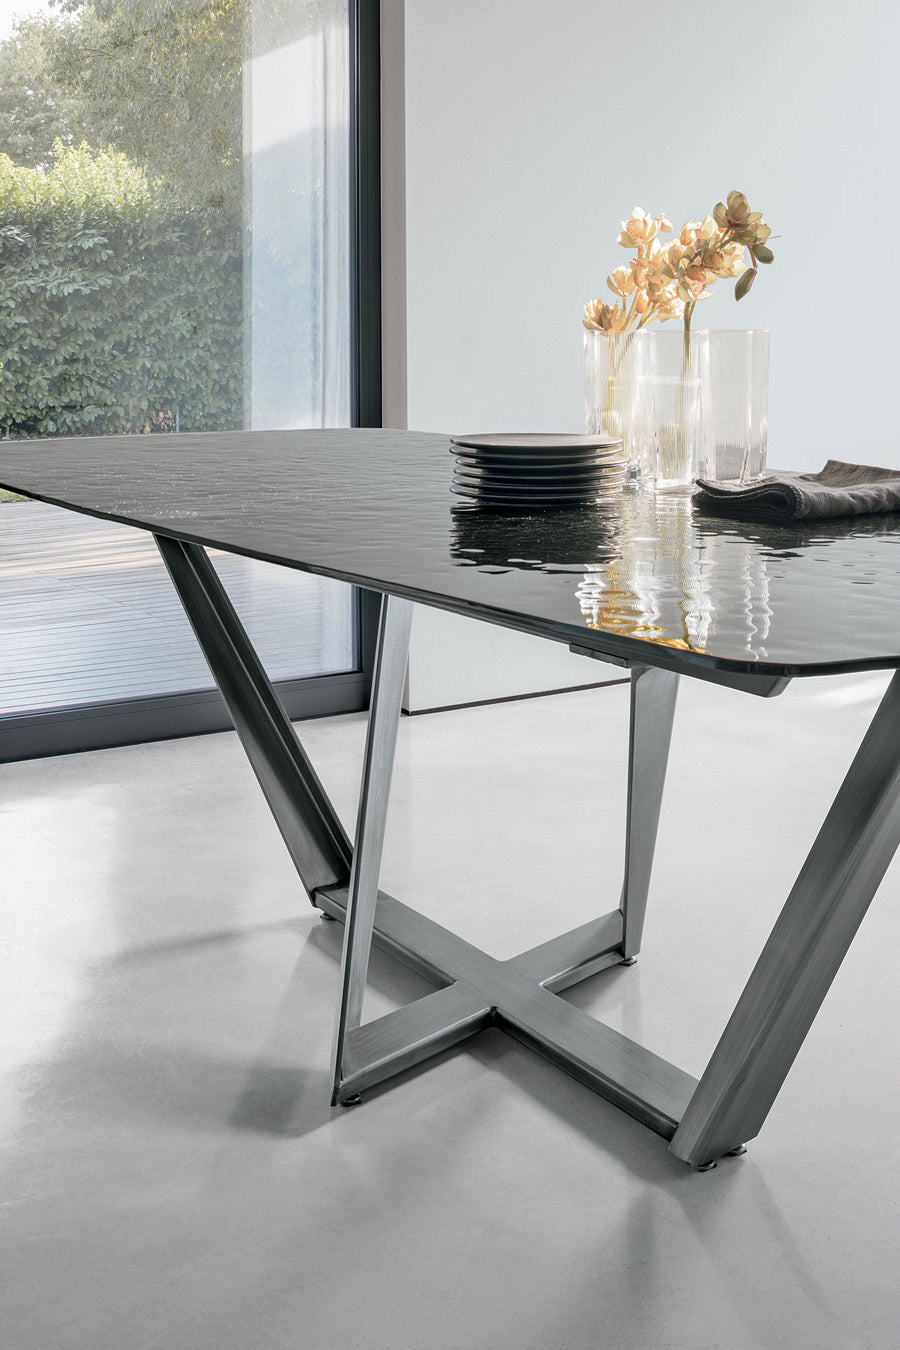 TARGET POINT PRIAMO 240 Fixed Dining Table with Wavy Glass Top